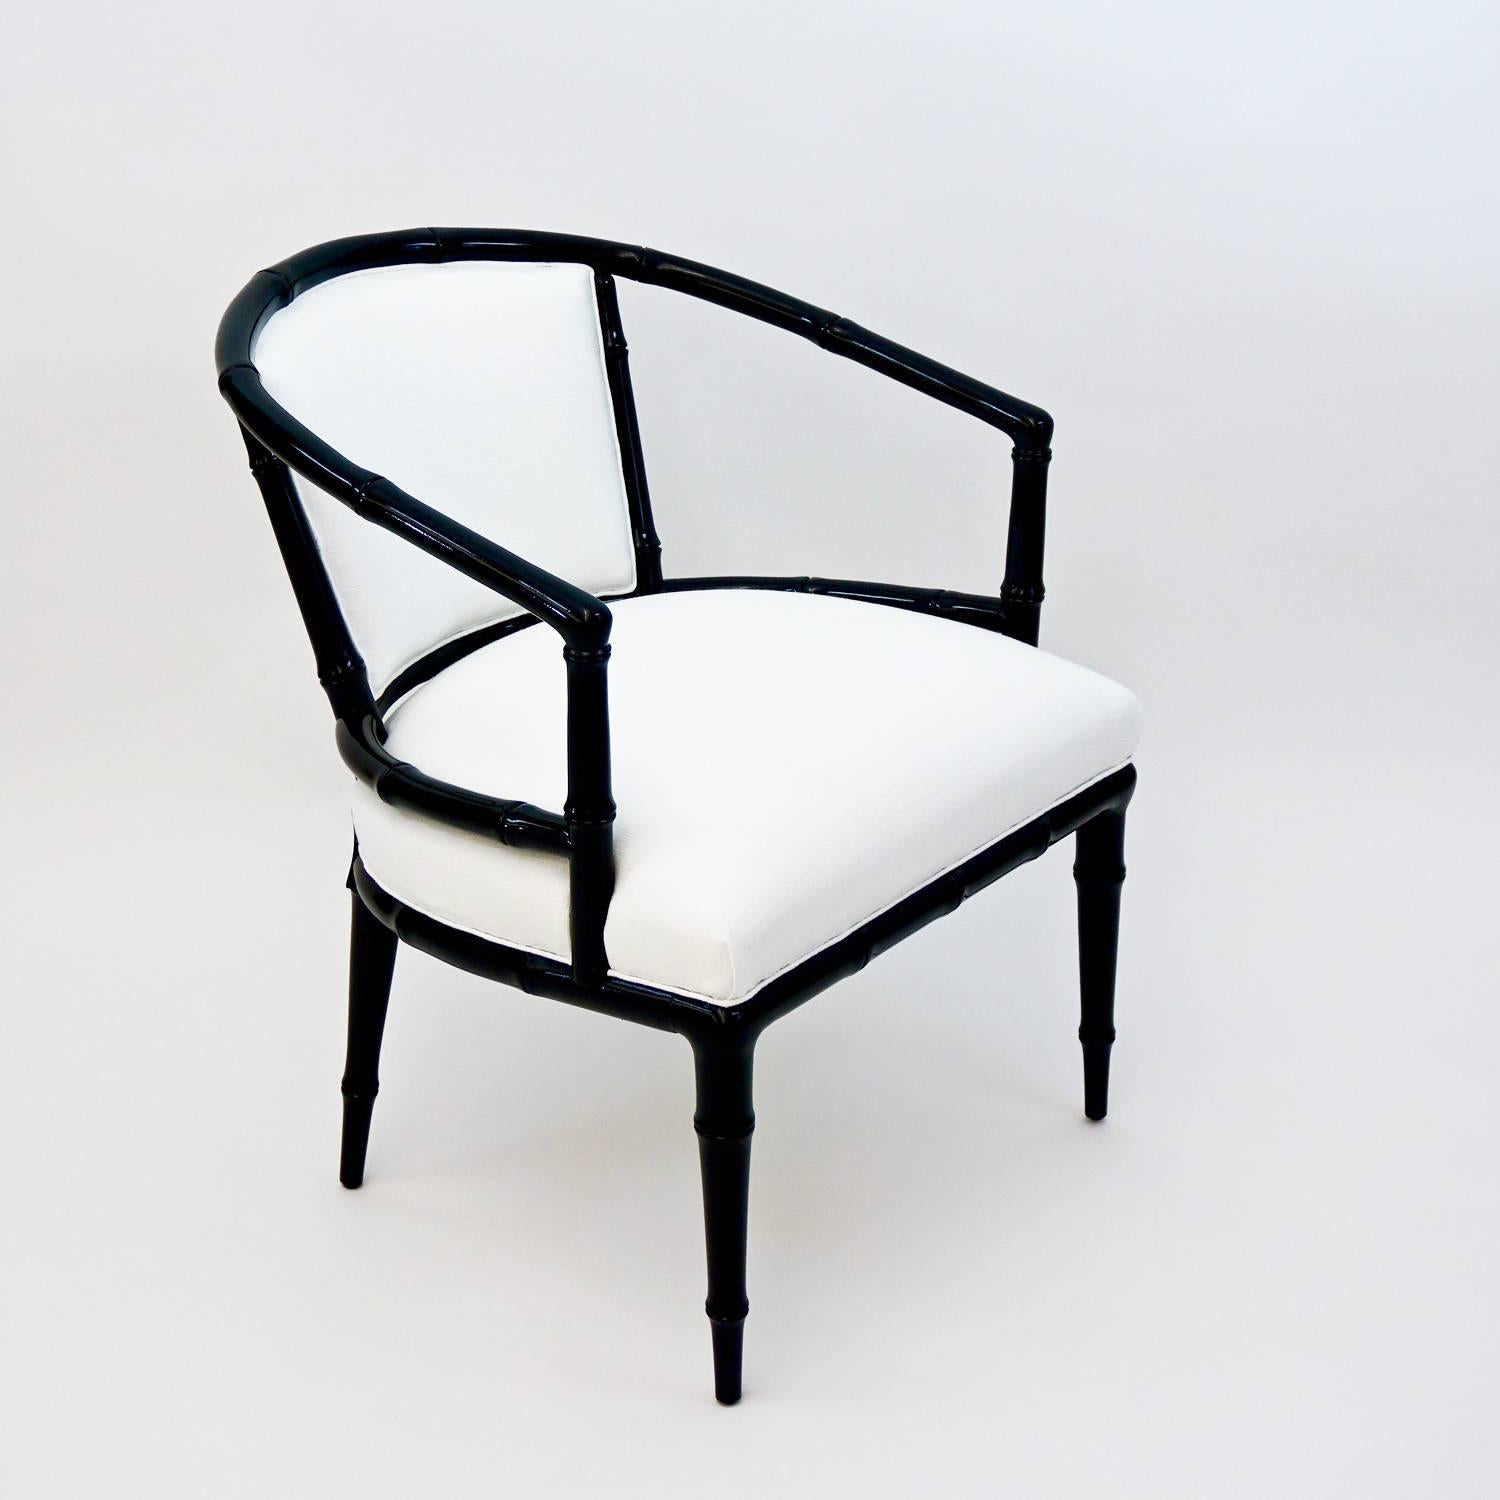 Vintage Hollywood Regency chair with jet black newly-lacquered arms and legs. Seat and back are newly upholstered in soft white linen fabric.

